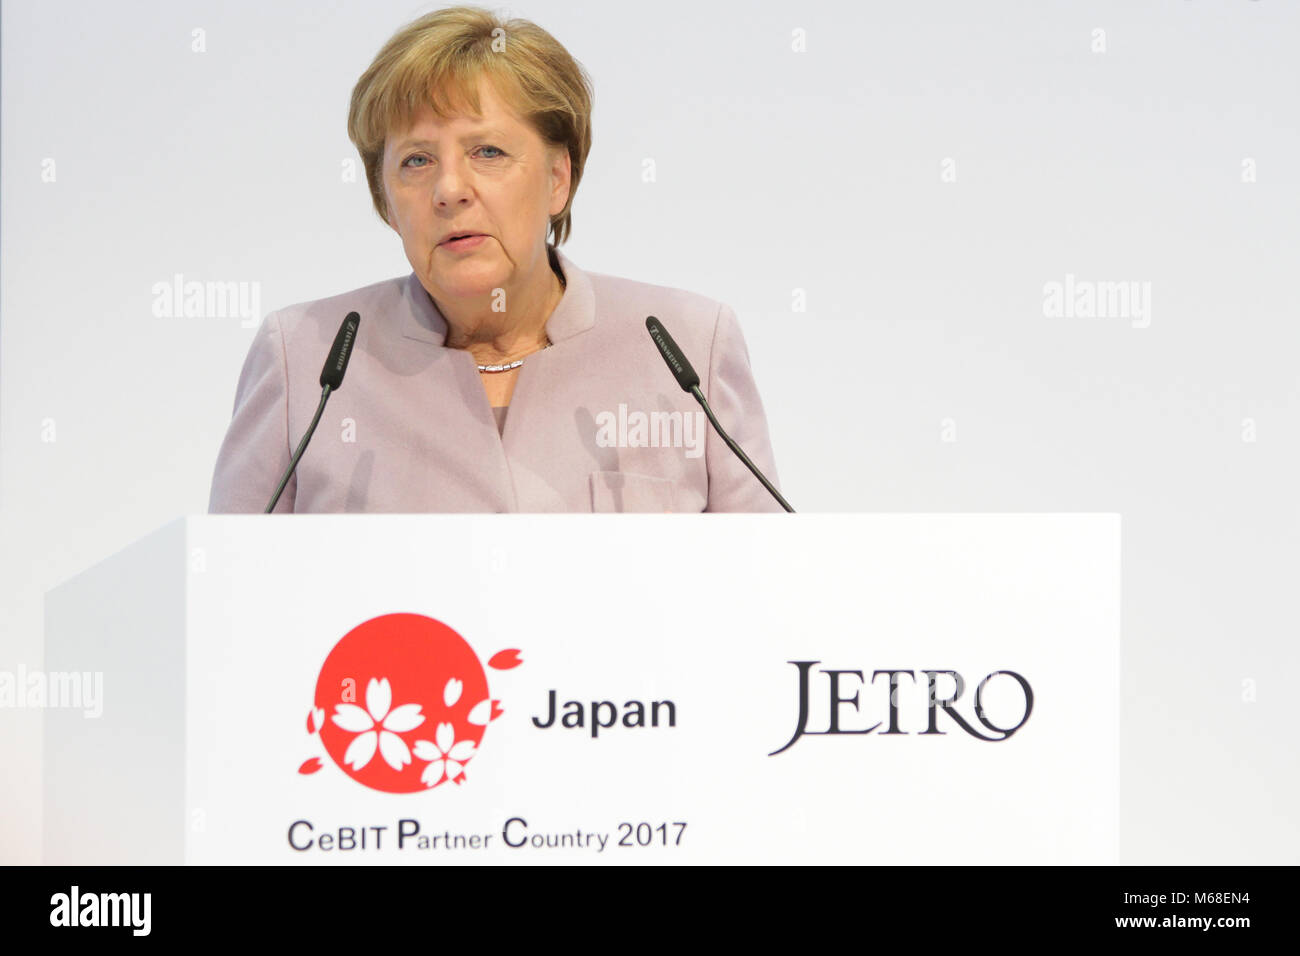 Hanover, Germany. 20th March, 2017. CeBIT 2017, ICT trade fair: Angela Merkel, Federal Chancellor of Germany, speaks at opening walk at booth of CeBIT 2017-partner country Japan. Credit: Christian Lademann Stock Photo